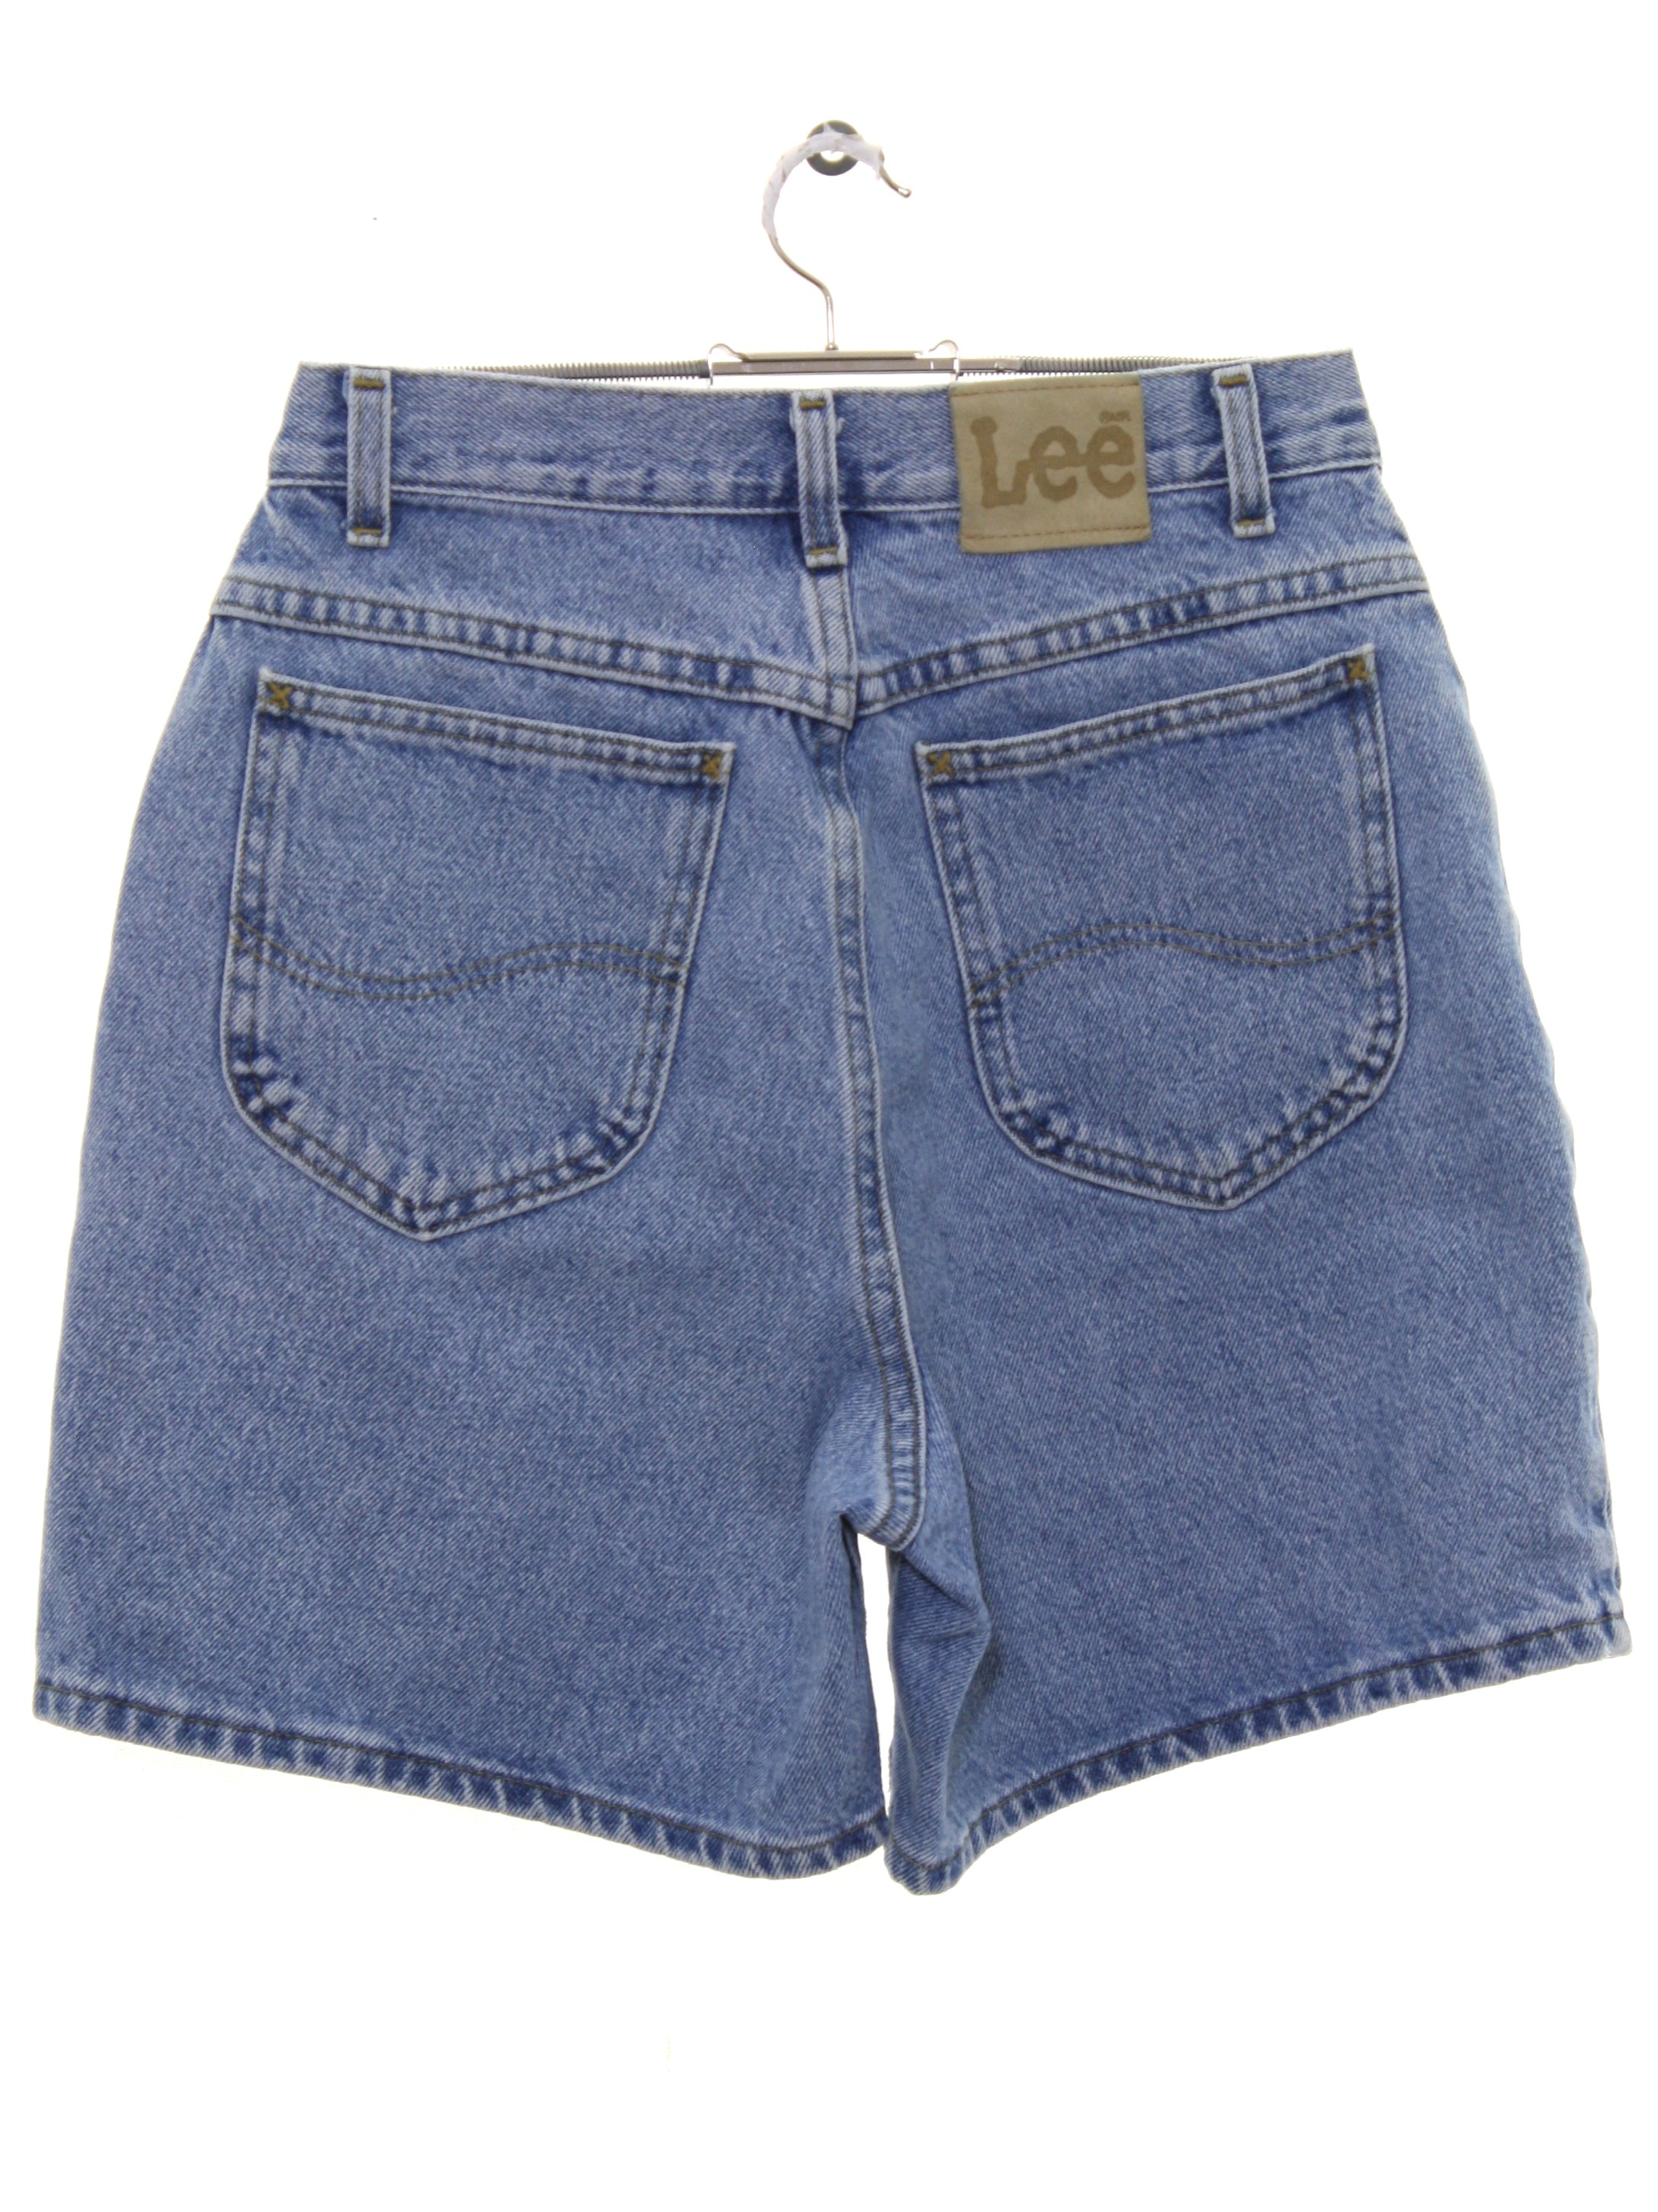 1990's Shorts (Lee): Early 90s -Lee- Womens stone washed slightly worn ...